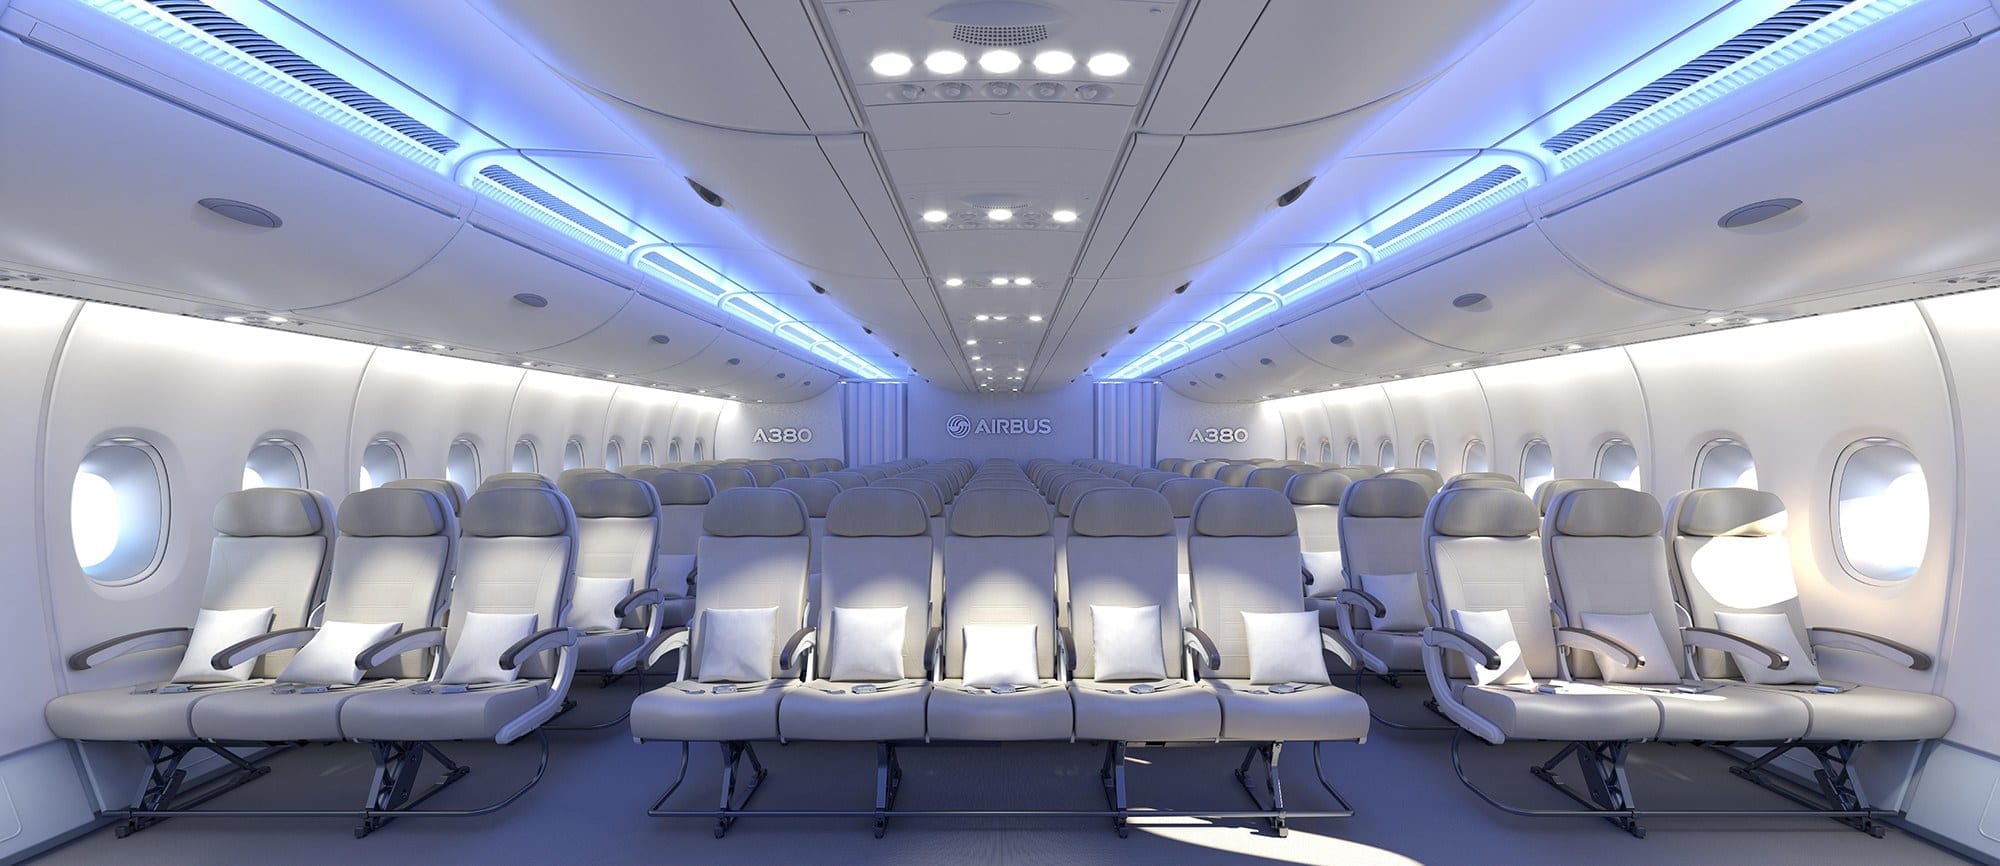 Airlines Are Mulling An Inferior Cabin Behind Economy - 